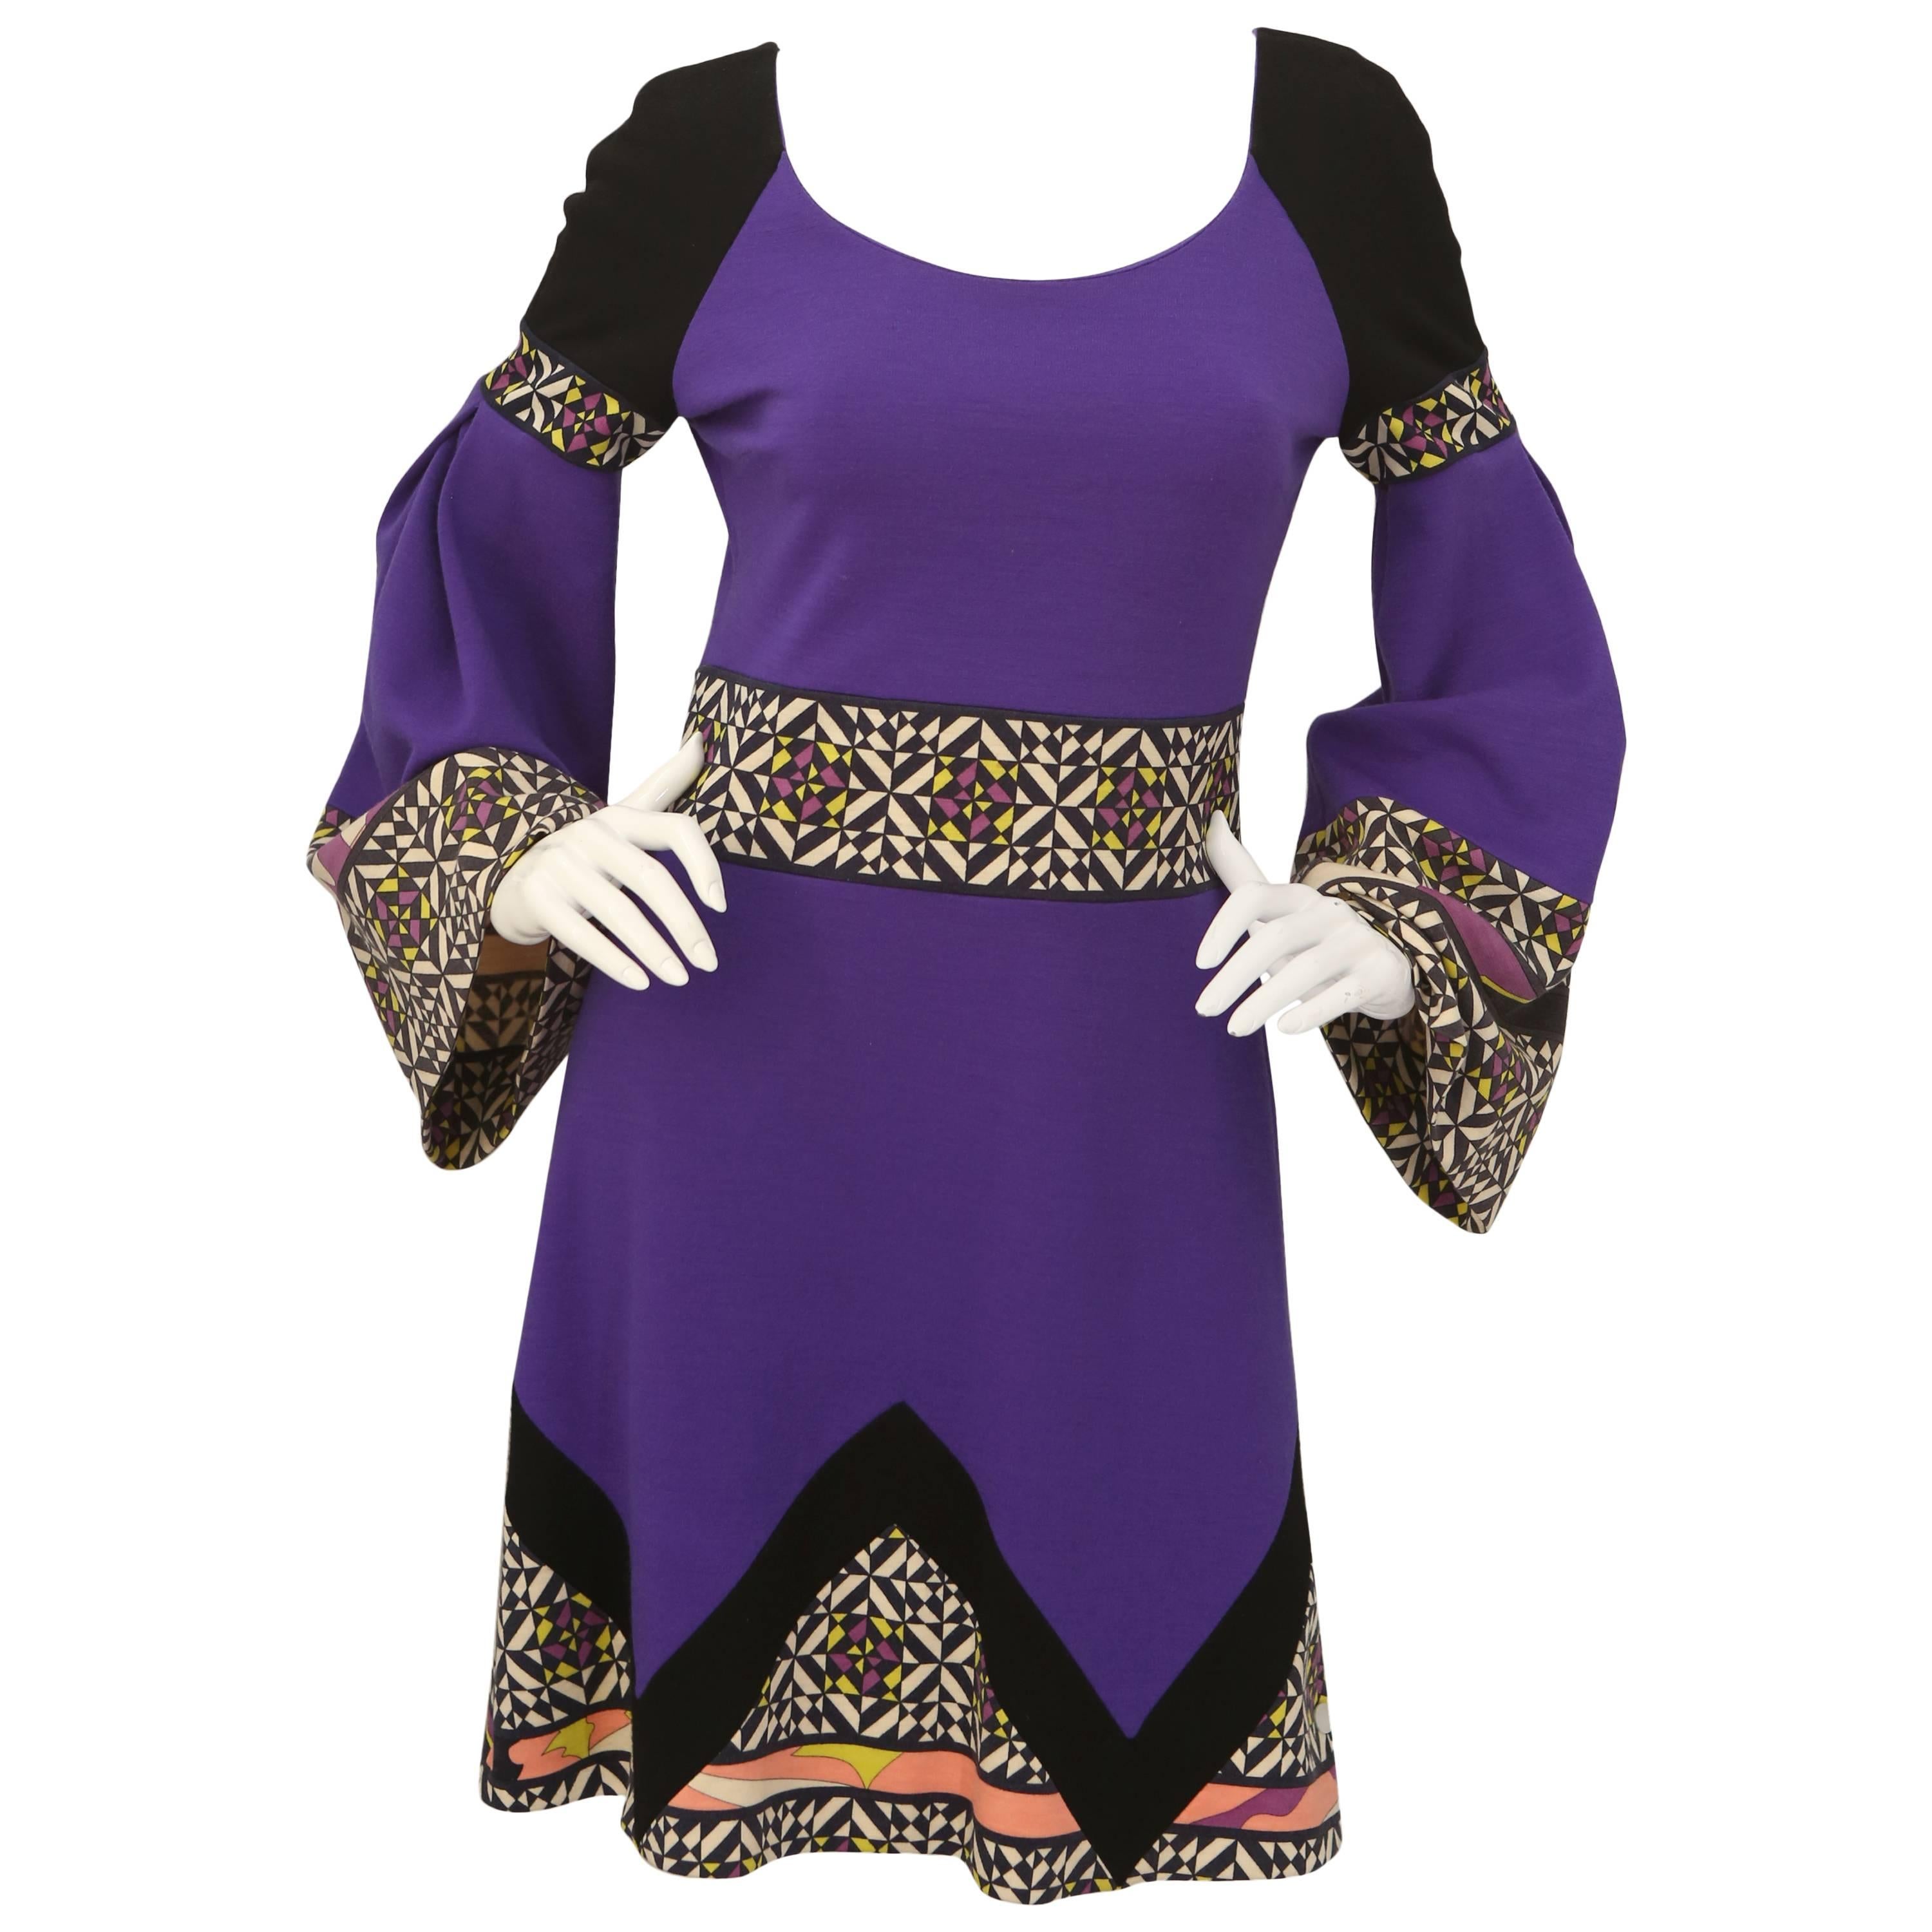 Emilio Pucci Purple/Multi Dress with Bell Sleeves 